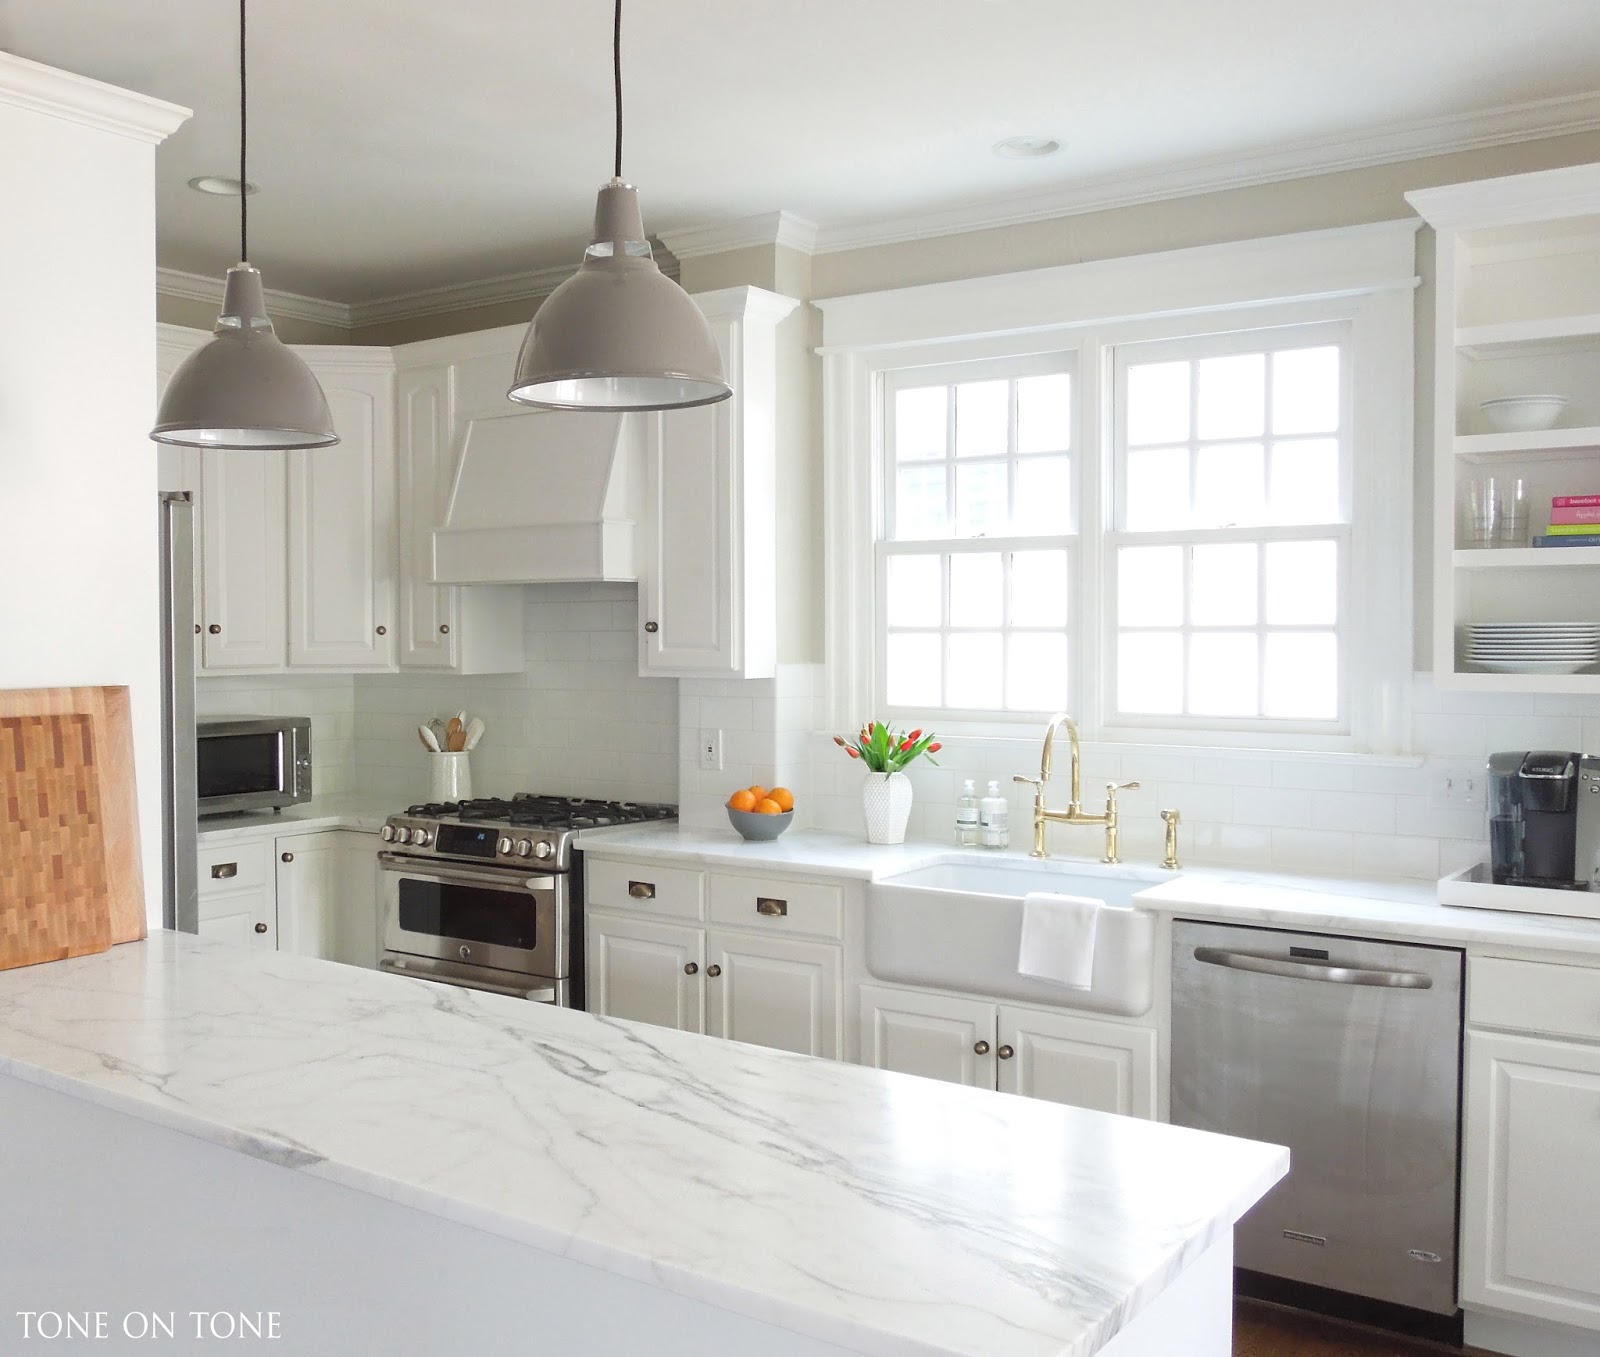 Tone On Tone A Kitchen Makeover